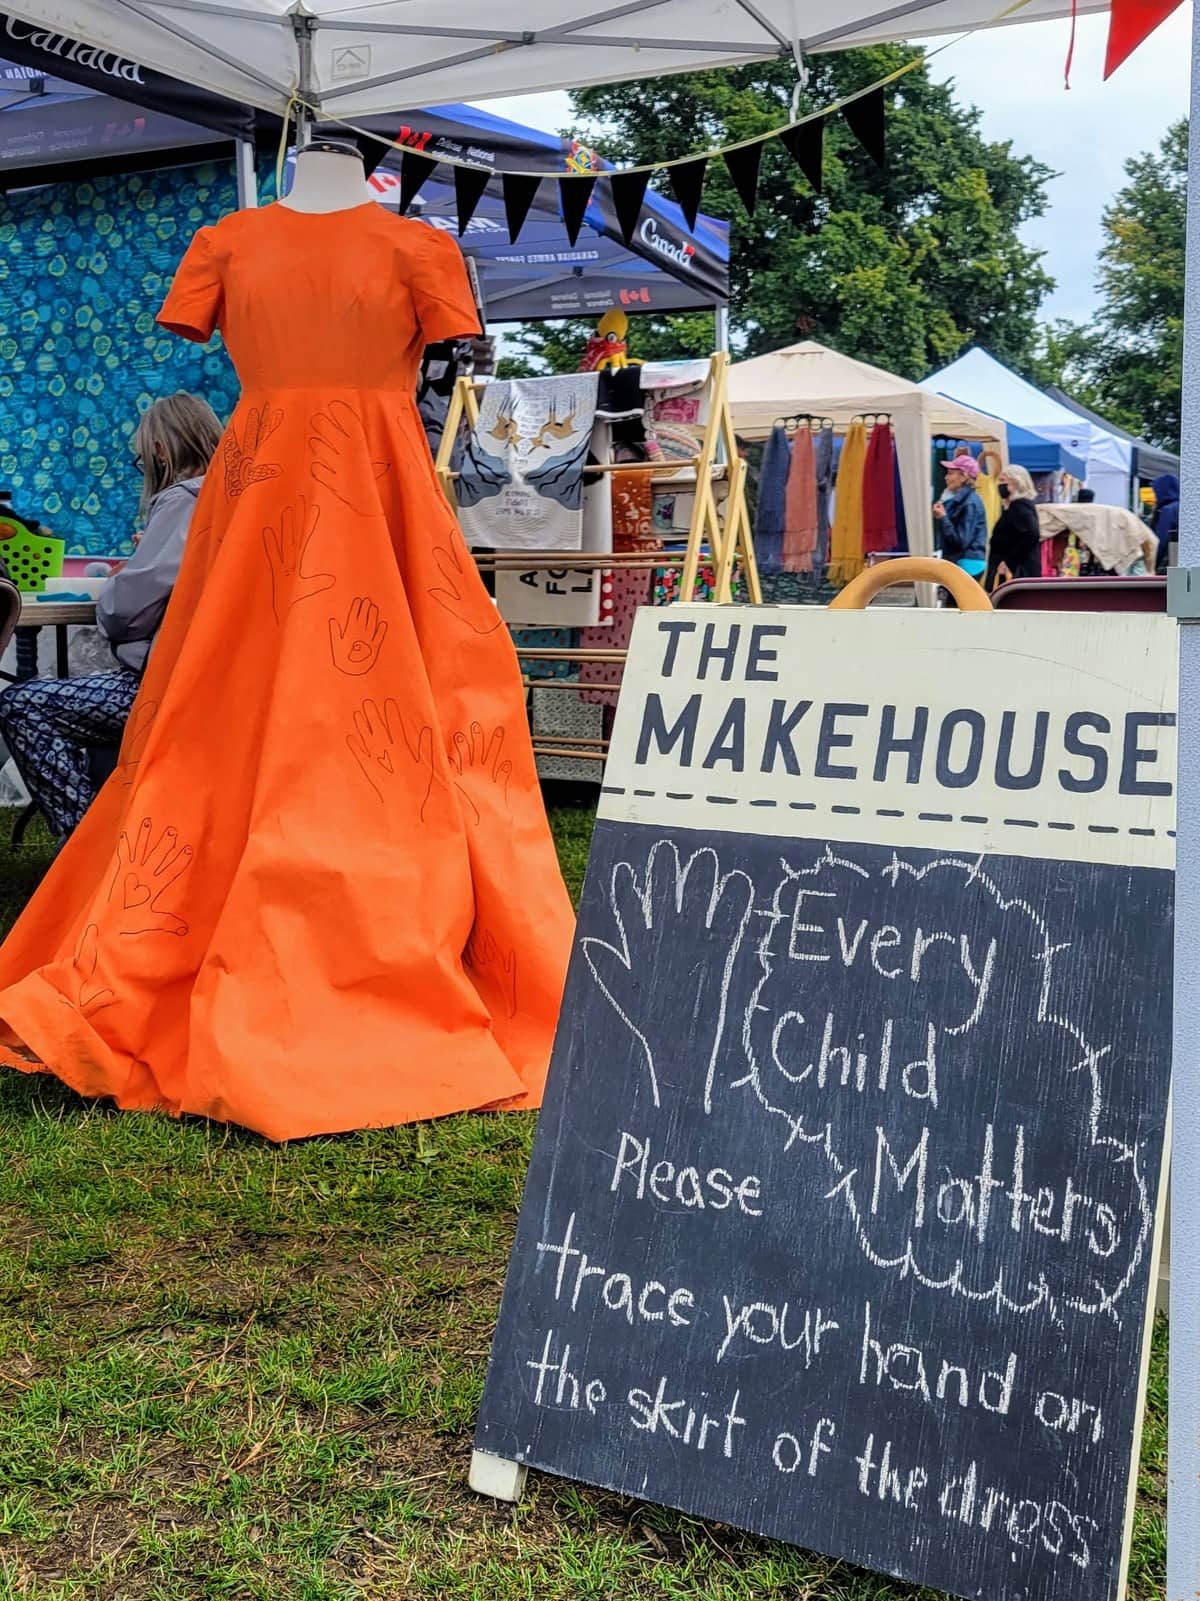 Image description: An orange gown with hands drawn on the skirt is on a dressform next to a chalk sign reading "Every child matters. Please trace your hand on the skirt of the dress."